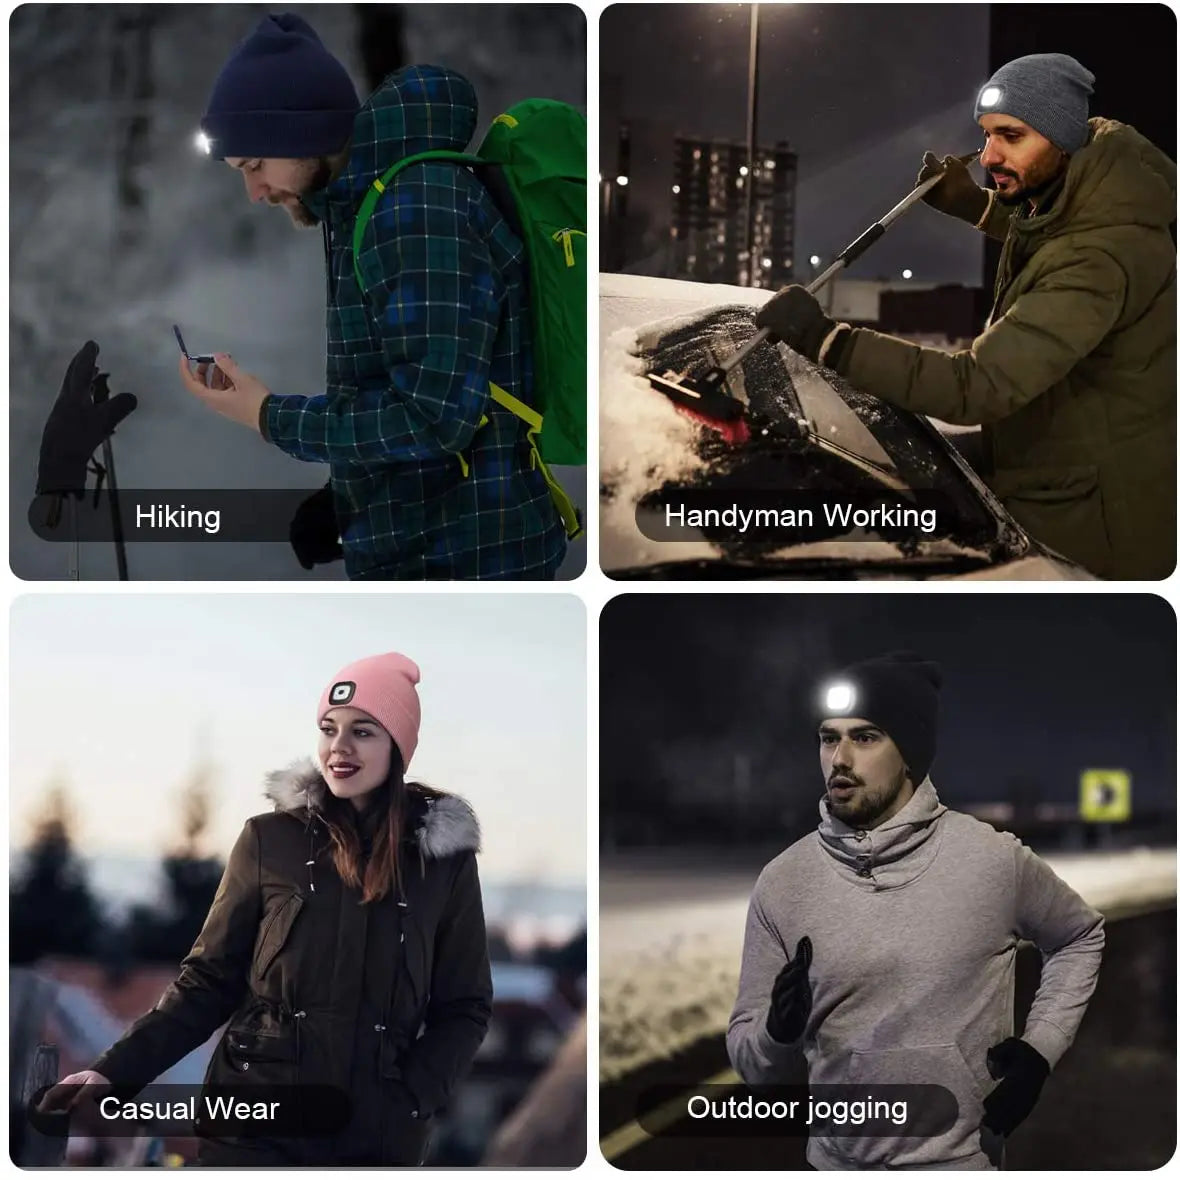 "GlowGear: LED Beanie Hat with Light - Unisex USB Rechargeable Lamp Hat for Hands-Free Illumination! Stay Warm and Bright in Winter Nights."